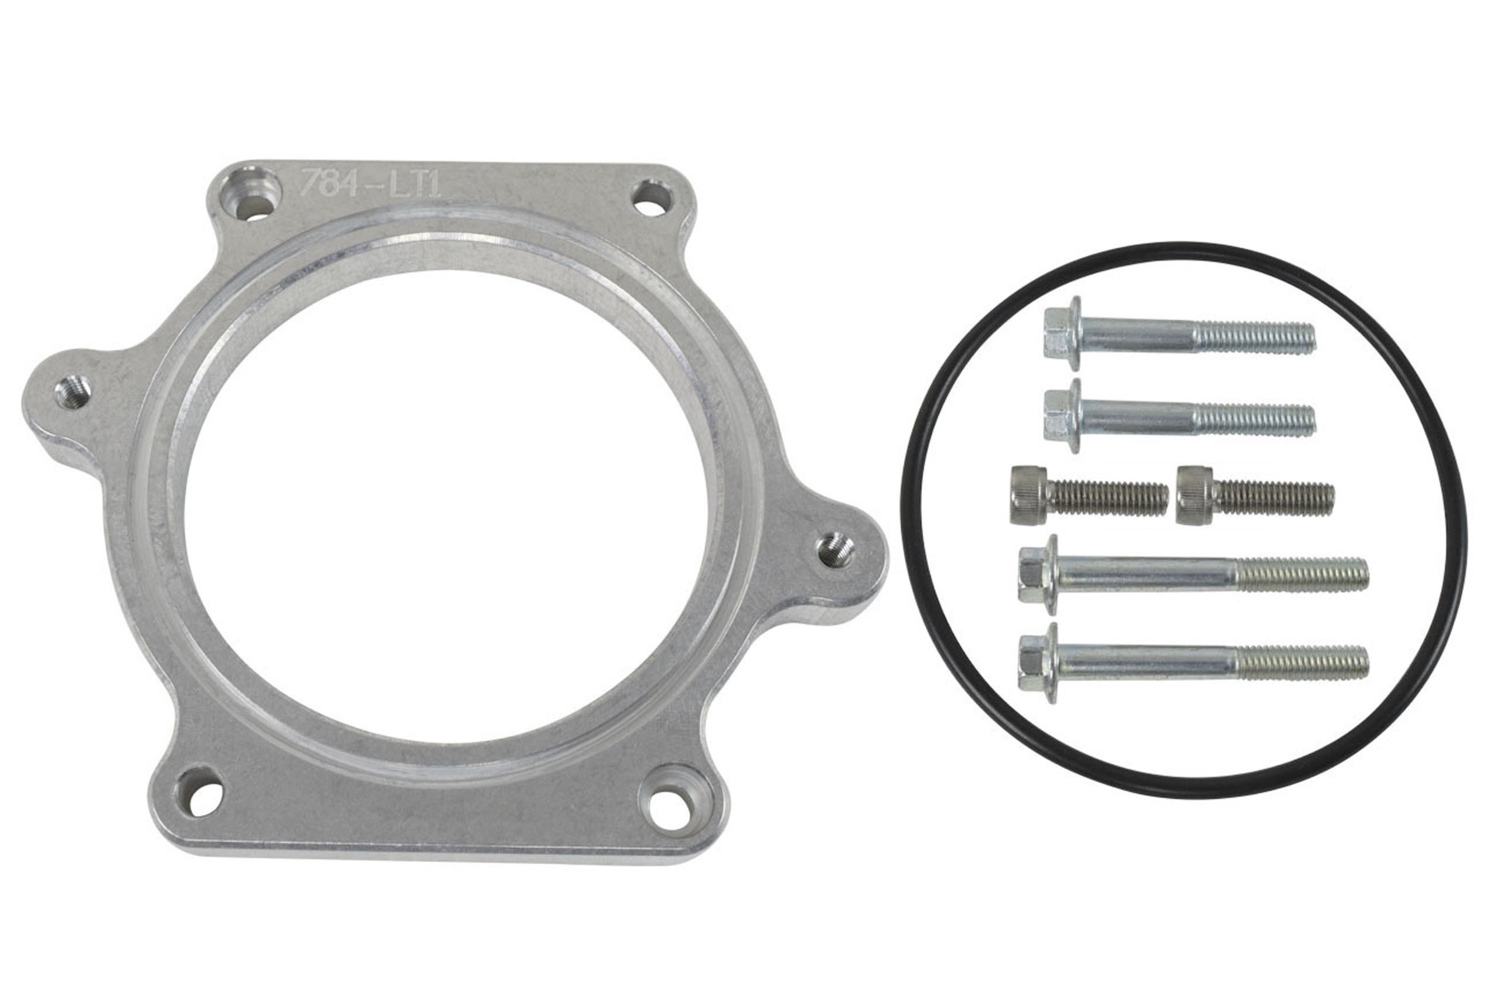 ICT Billet 551784-LT1 Throttle Body Adapter, 1/2 in Thick, Gasket / Hardware, Rotation, Aluminum, Natural, GM LT-Series 1992-97, Each